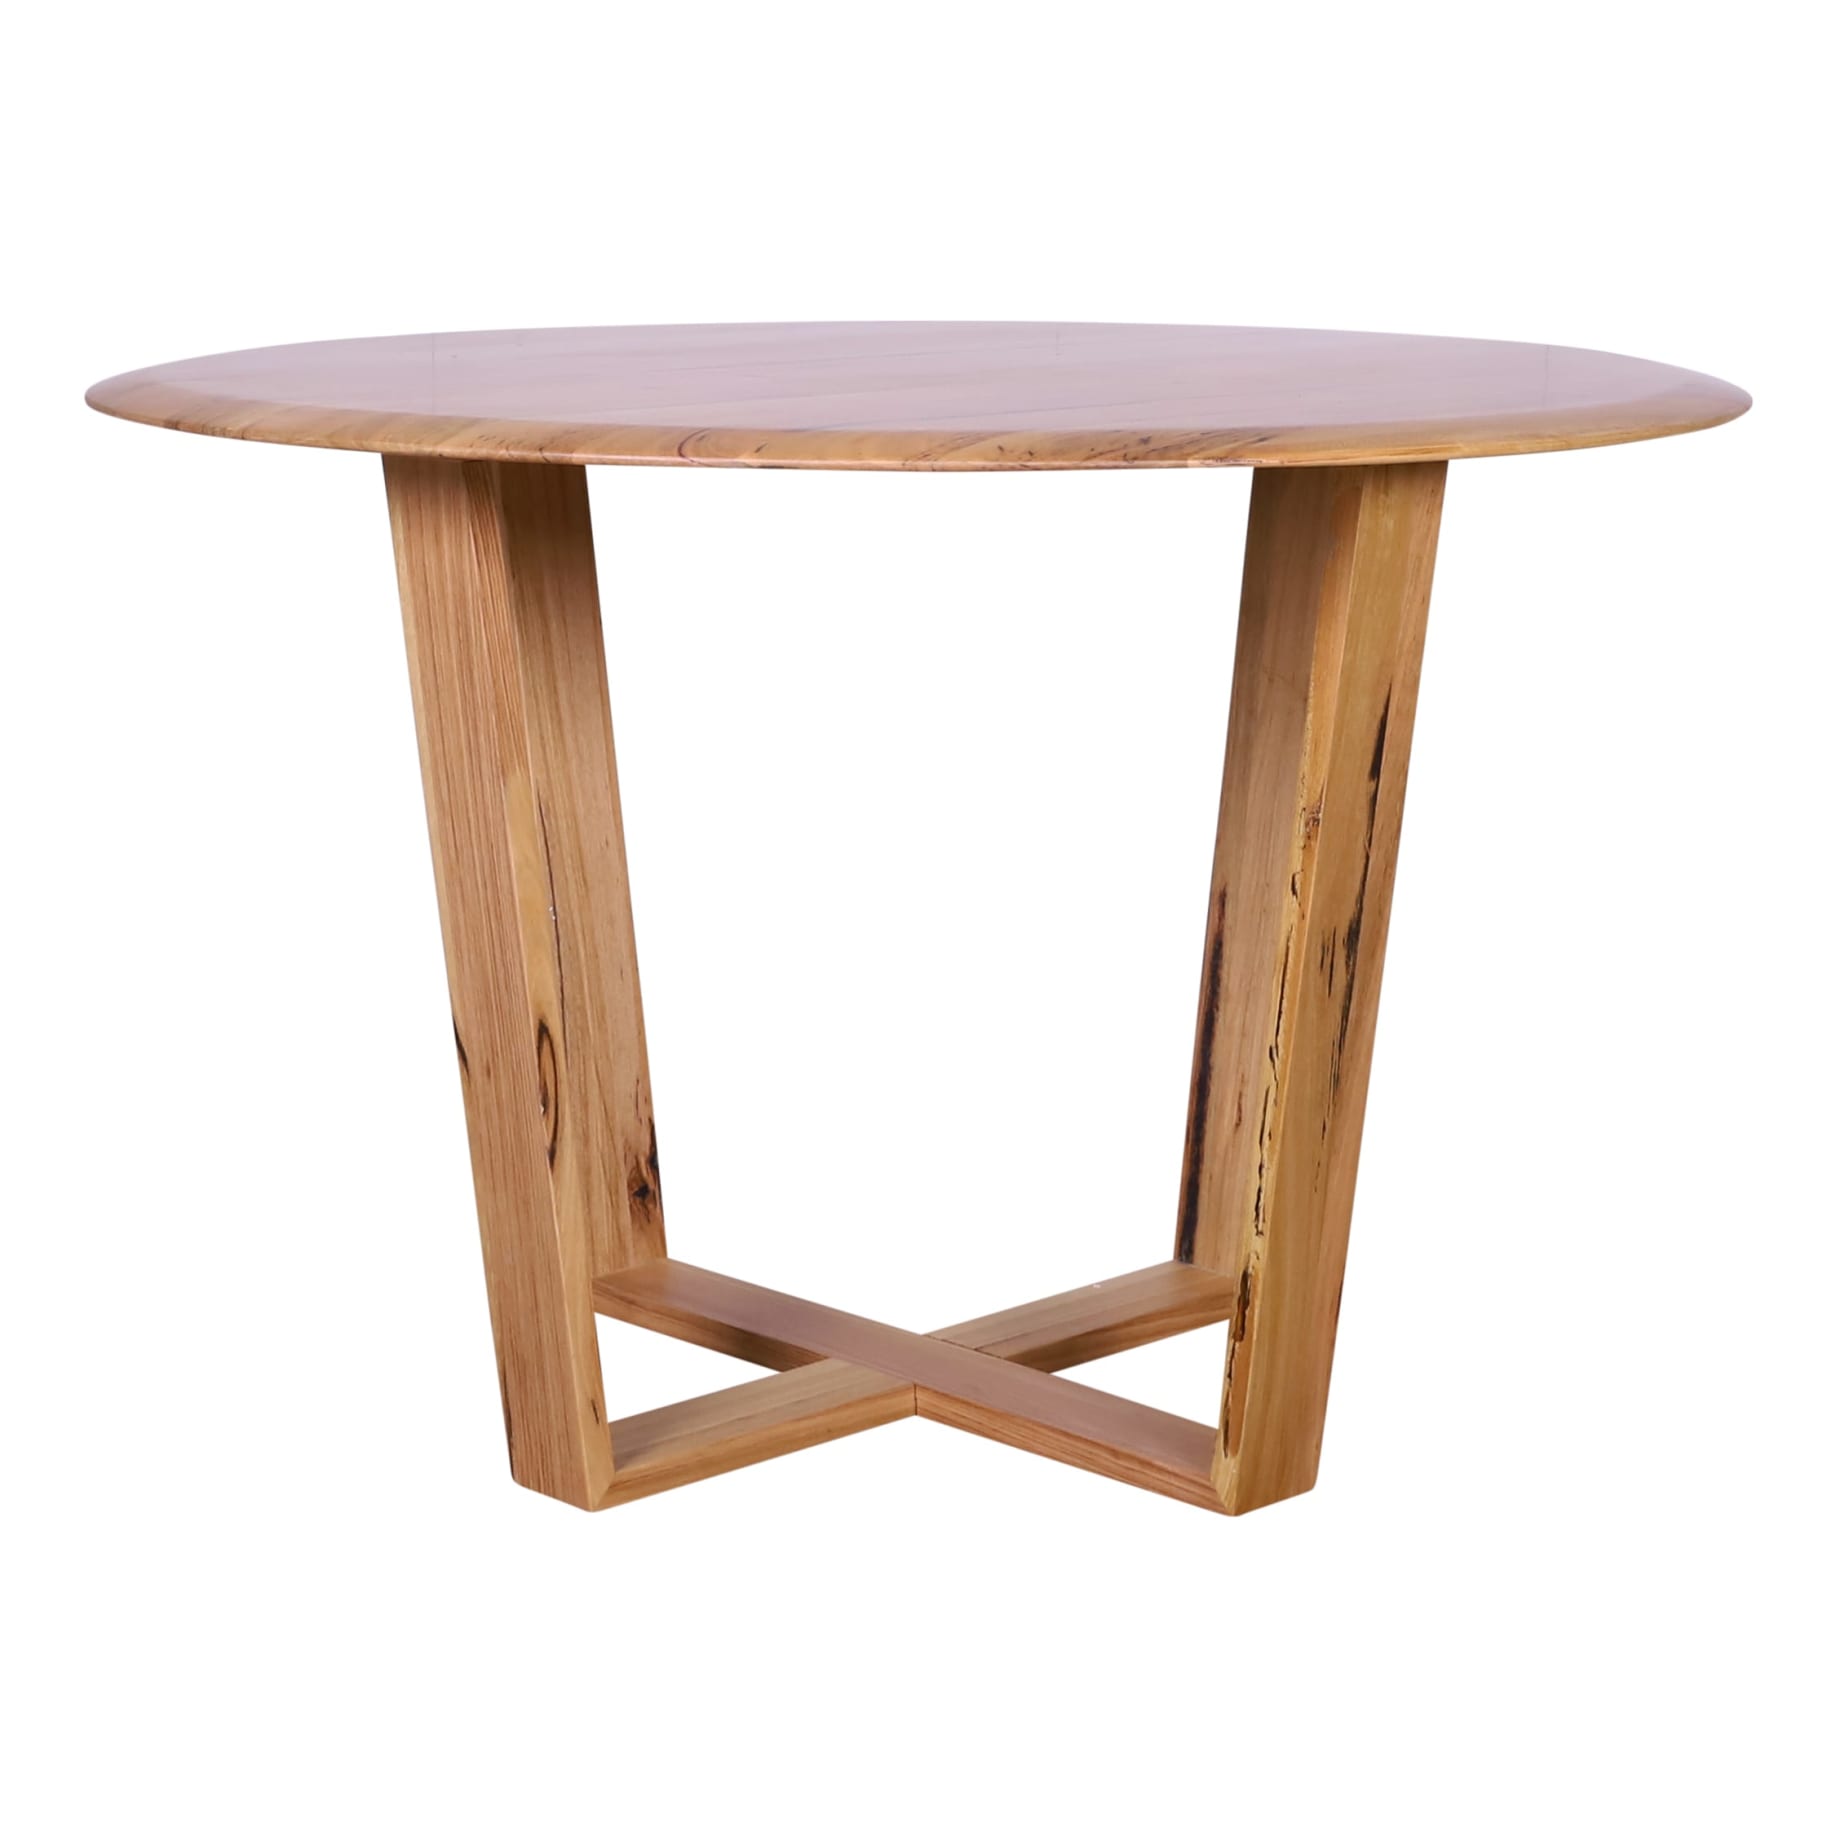 Baxter Round Dining Table 120cm in Aust Messmate